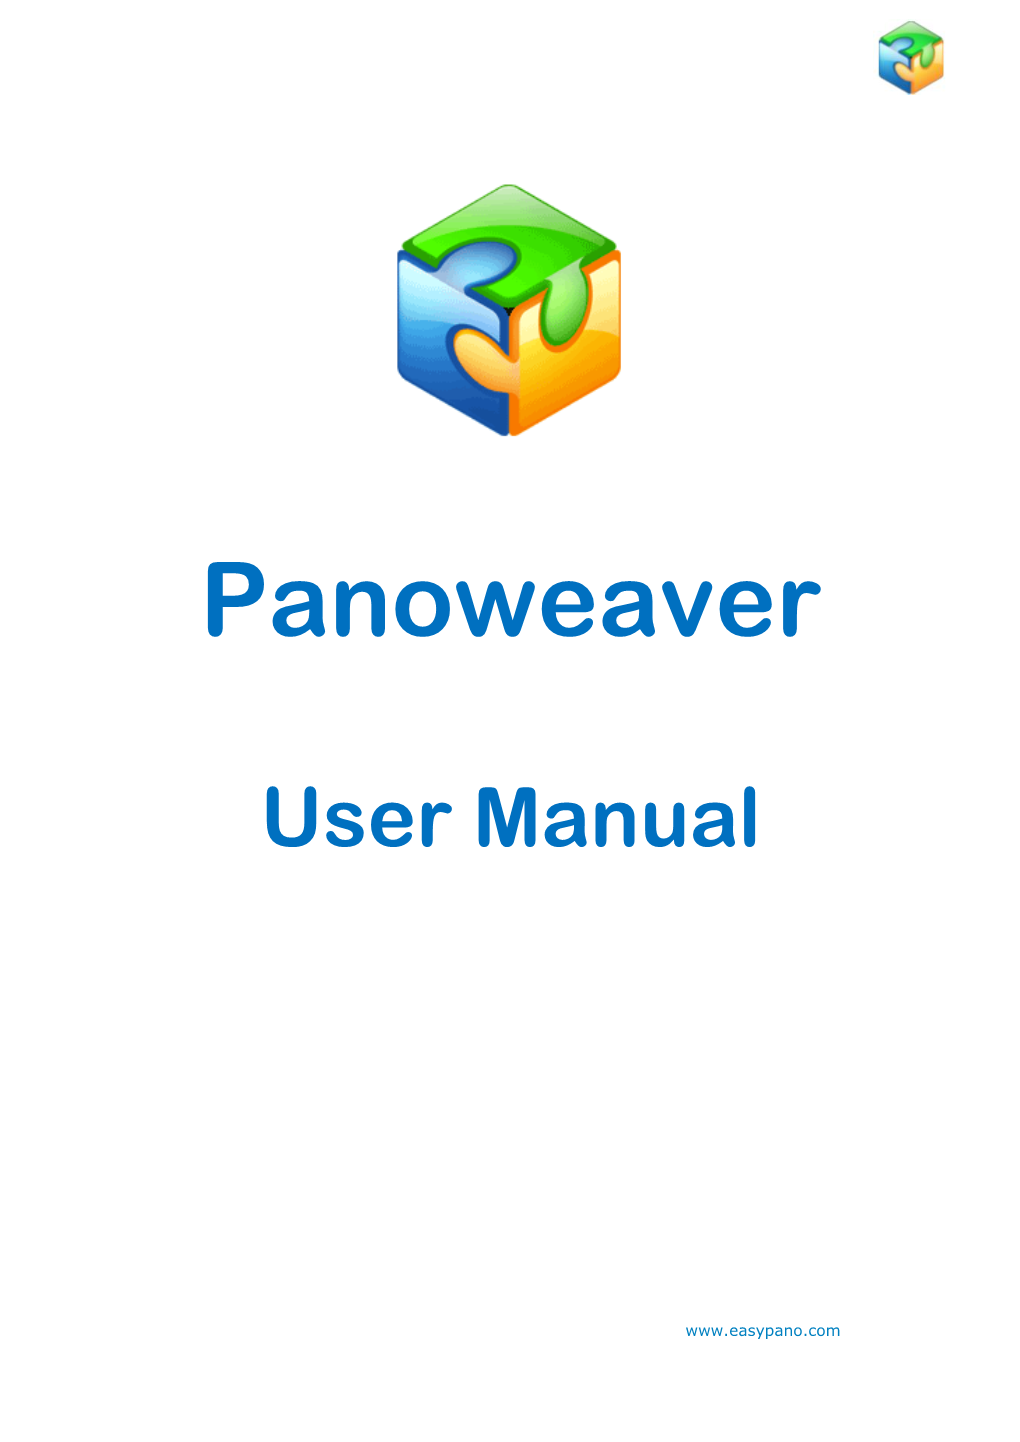 Panoweaver 9 User Manual (To Start the Online Help, Select Help > Help Topics from the Main Menu Or Press F1)